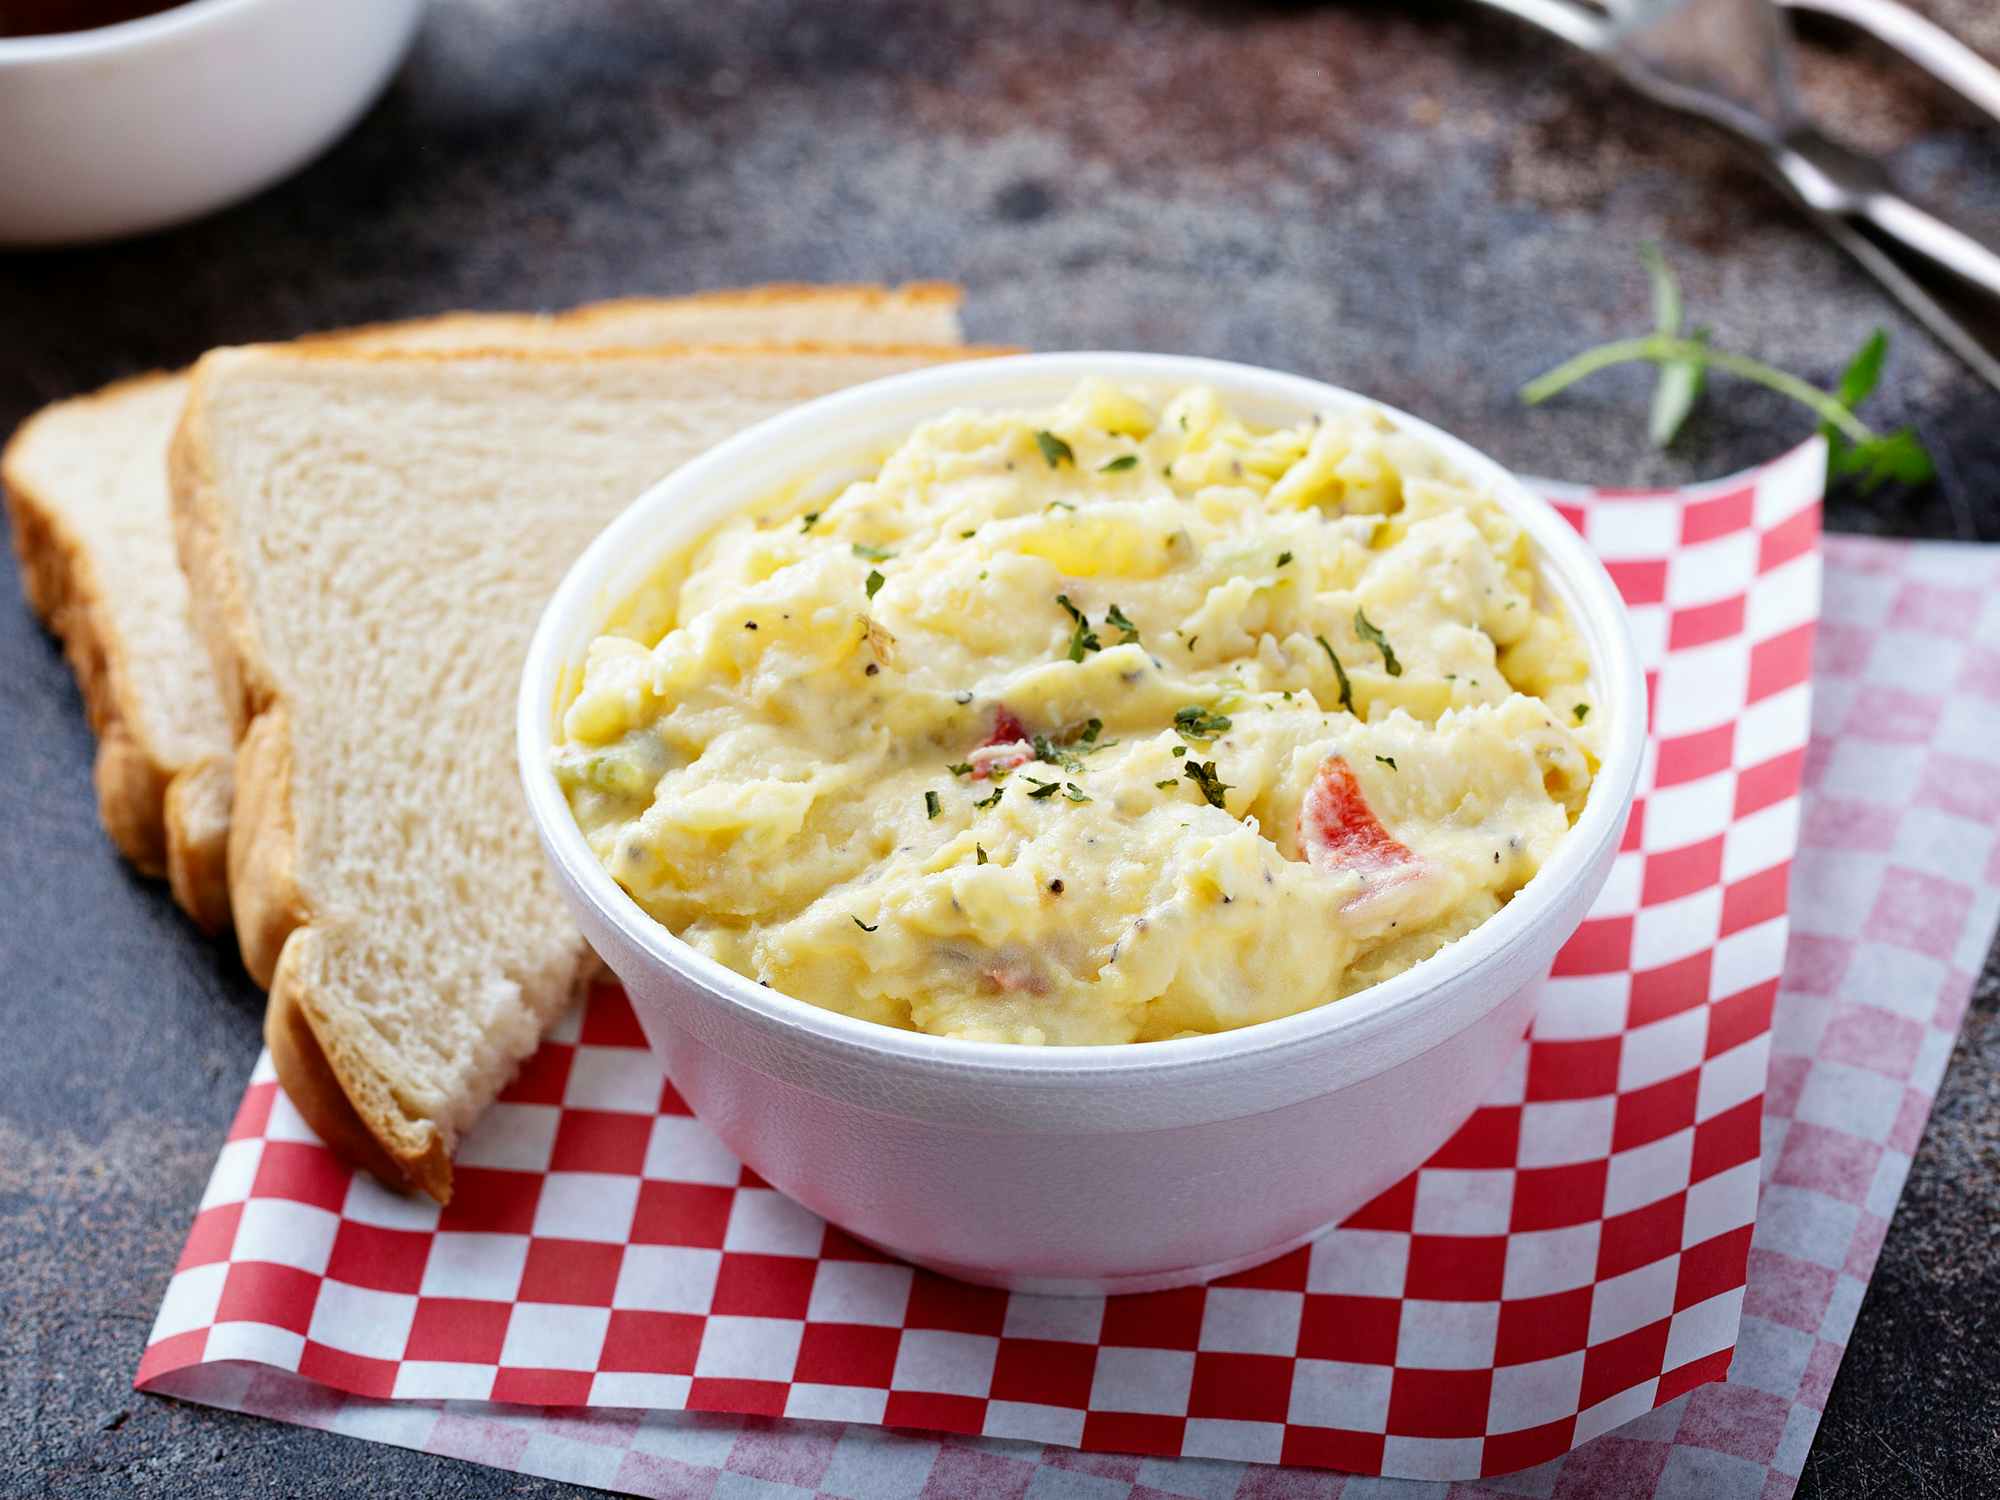 A bowl of potato salad next to some slices of bread